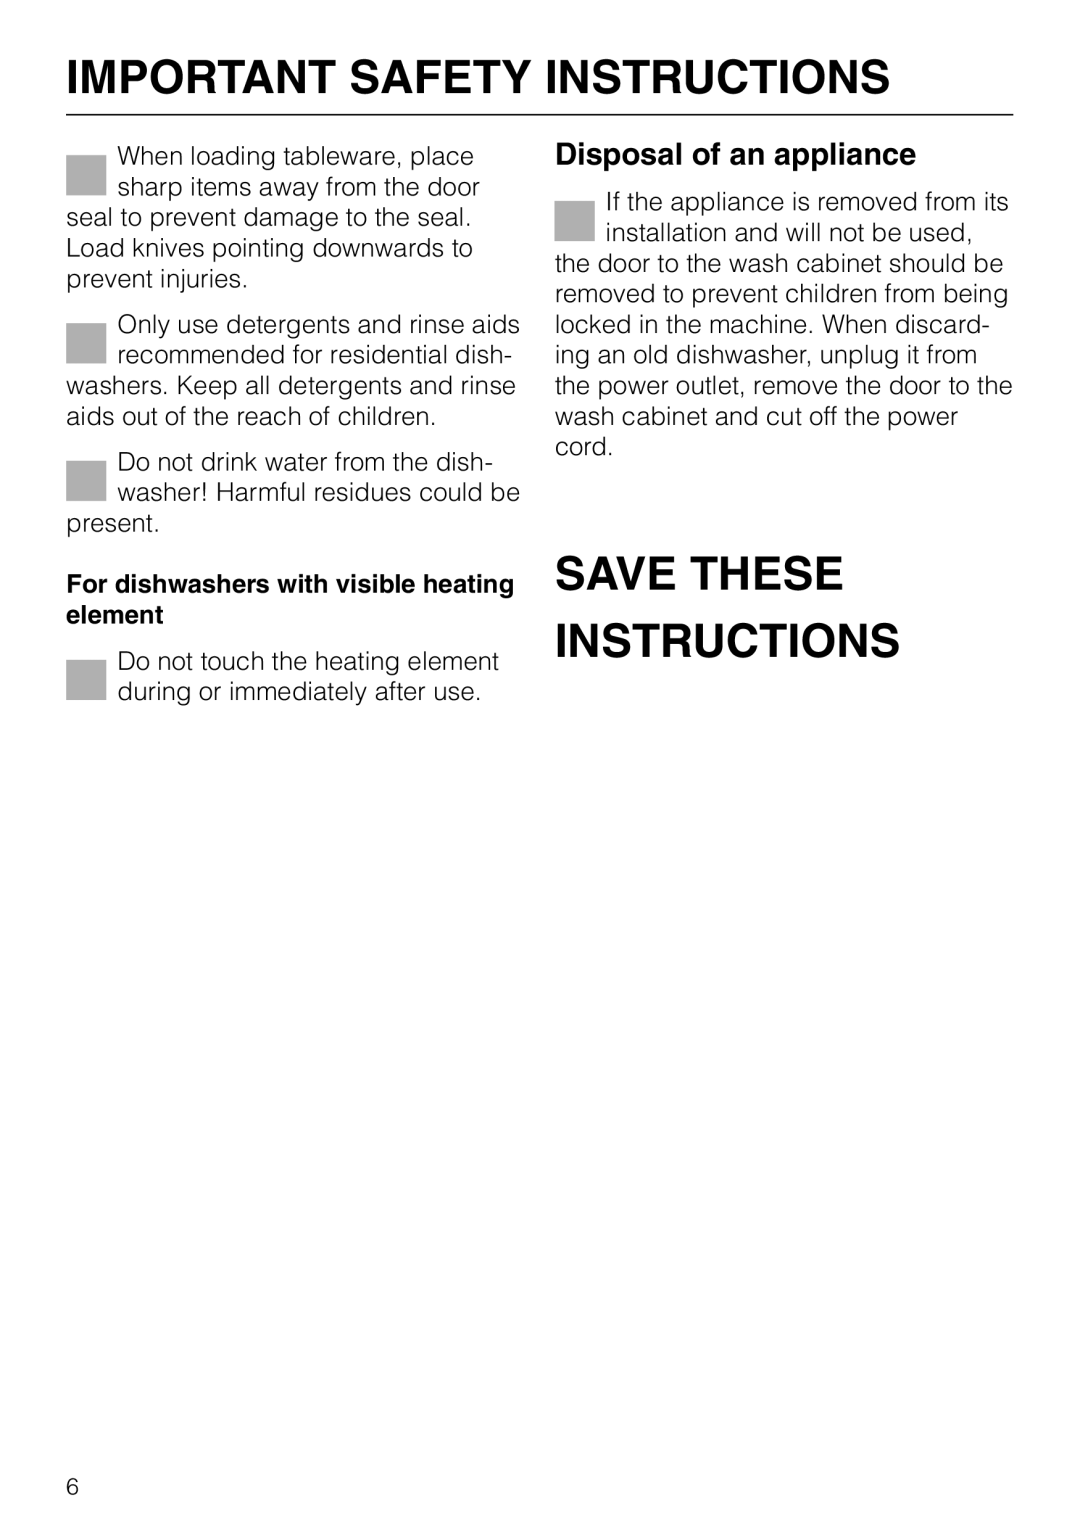 Miele G 863 PLUS, G 663 PLUS Save These Instructions, Disposal of an appliance, Important Safety Instructions 